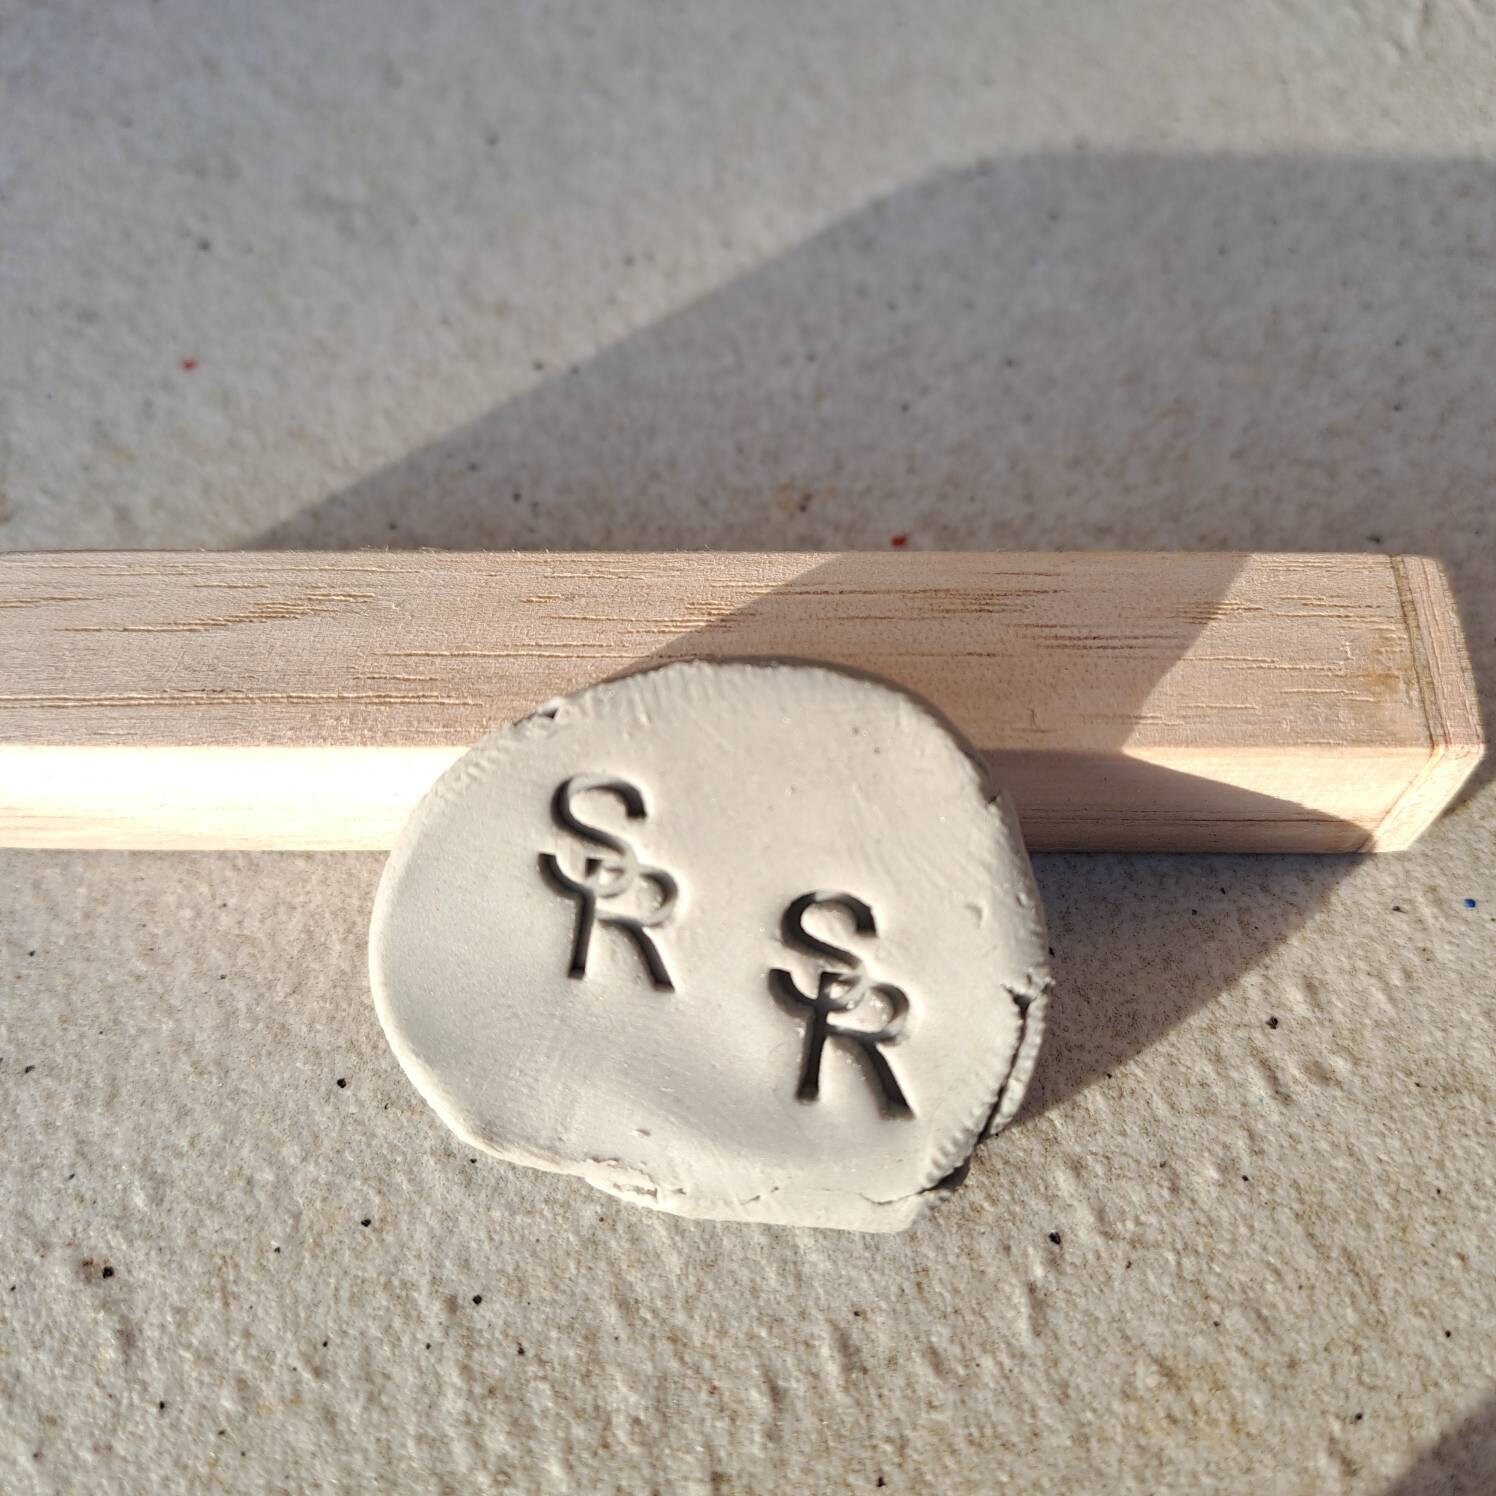 Custom Pottery Stamp, Pottery Signature Stamp, Personalized Clay Stamp, Ceramic  Stamp, Polymer Stamp 